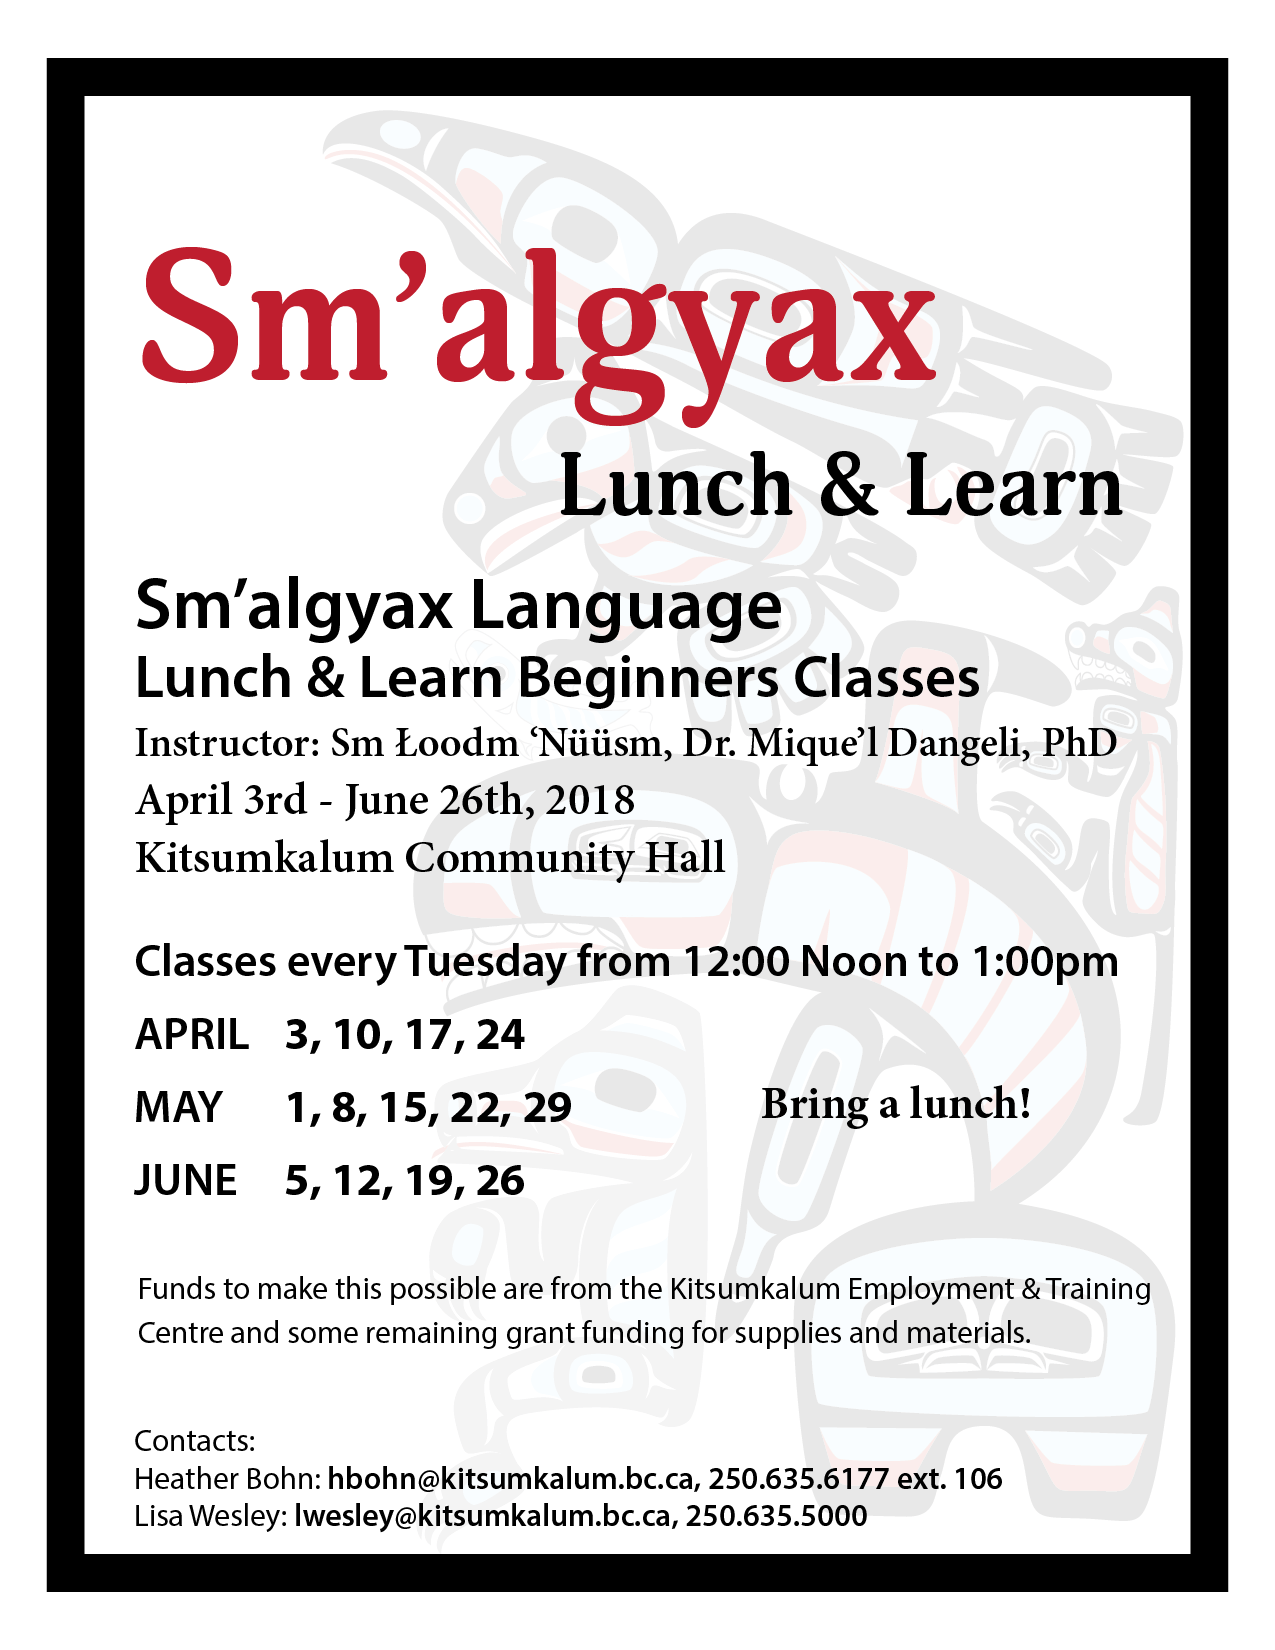 Sm’algyax Lunch and Learn Classes